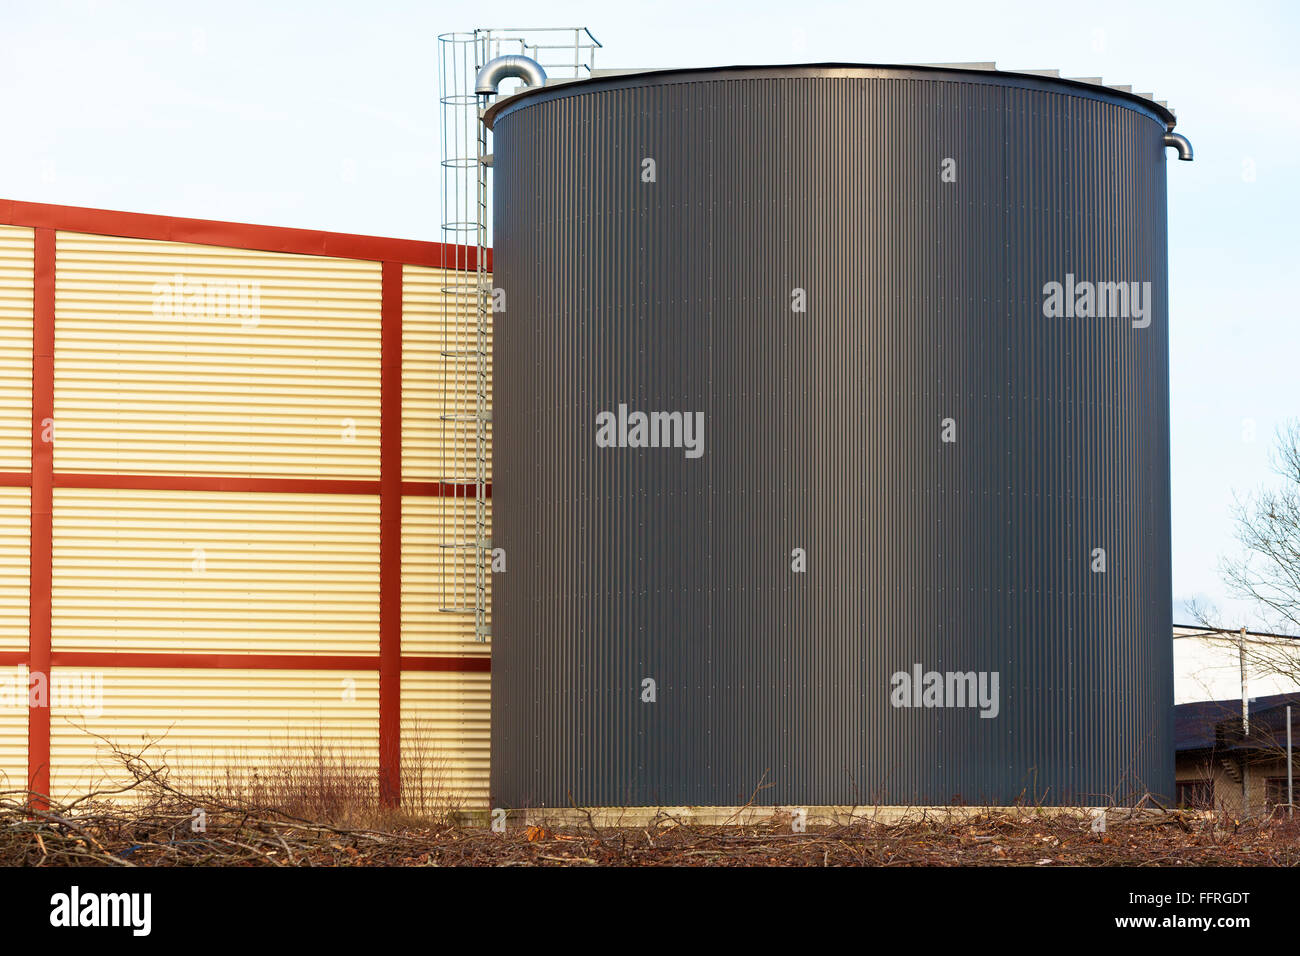 Large black silo or storage building with an aluminum or steel ladder on the outside. Red and yellow building behind ladder. Stock Photo